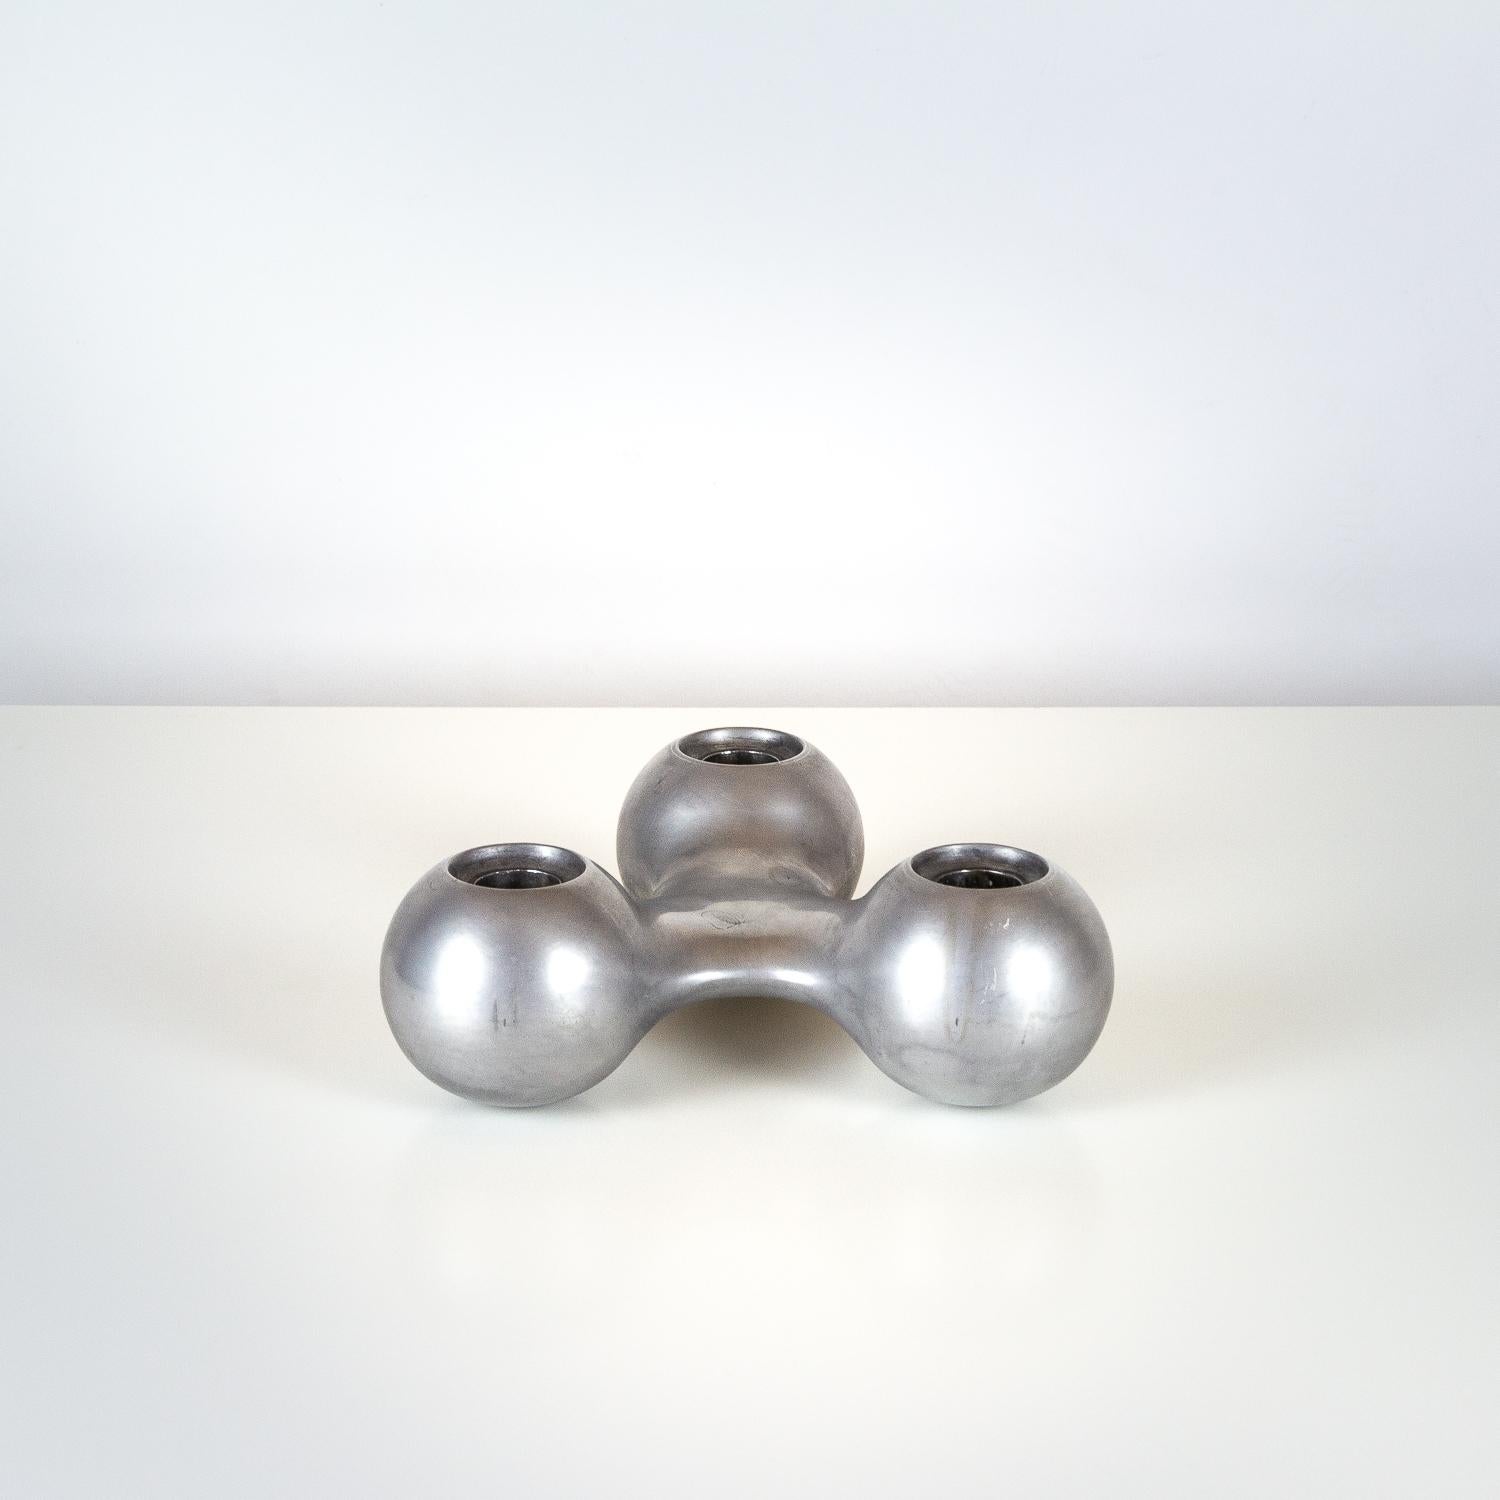 Georg Jensen candleholder designed by Arne Jacobsen. This unusual matte-finish version was made for Aarhus Rådhus (town hall) in Denmark which Jacobsen designed with Erik Møller in 1937. Stamped with maker’s mark and Aarhus city crest. Wear and